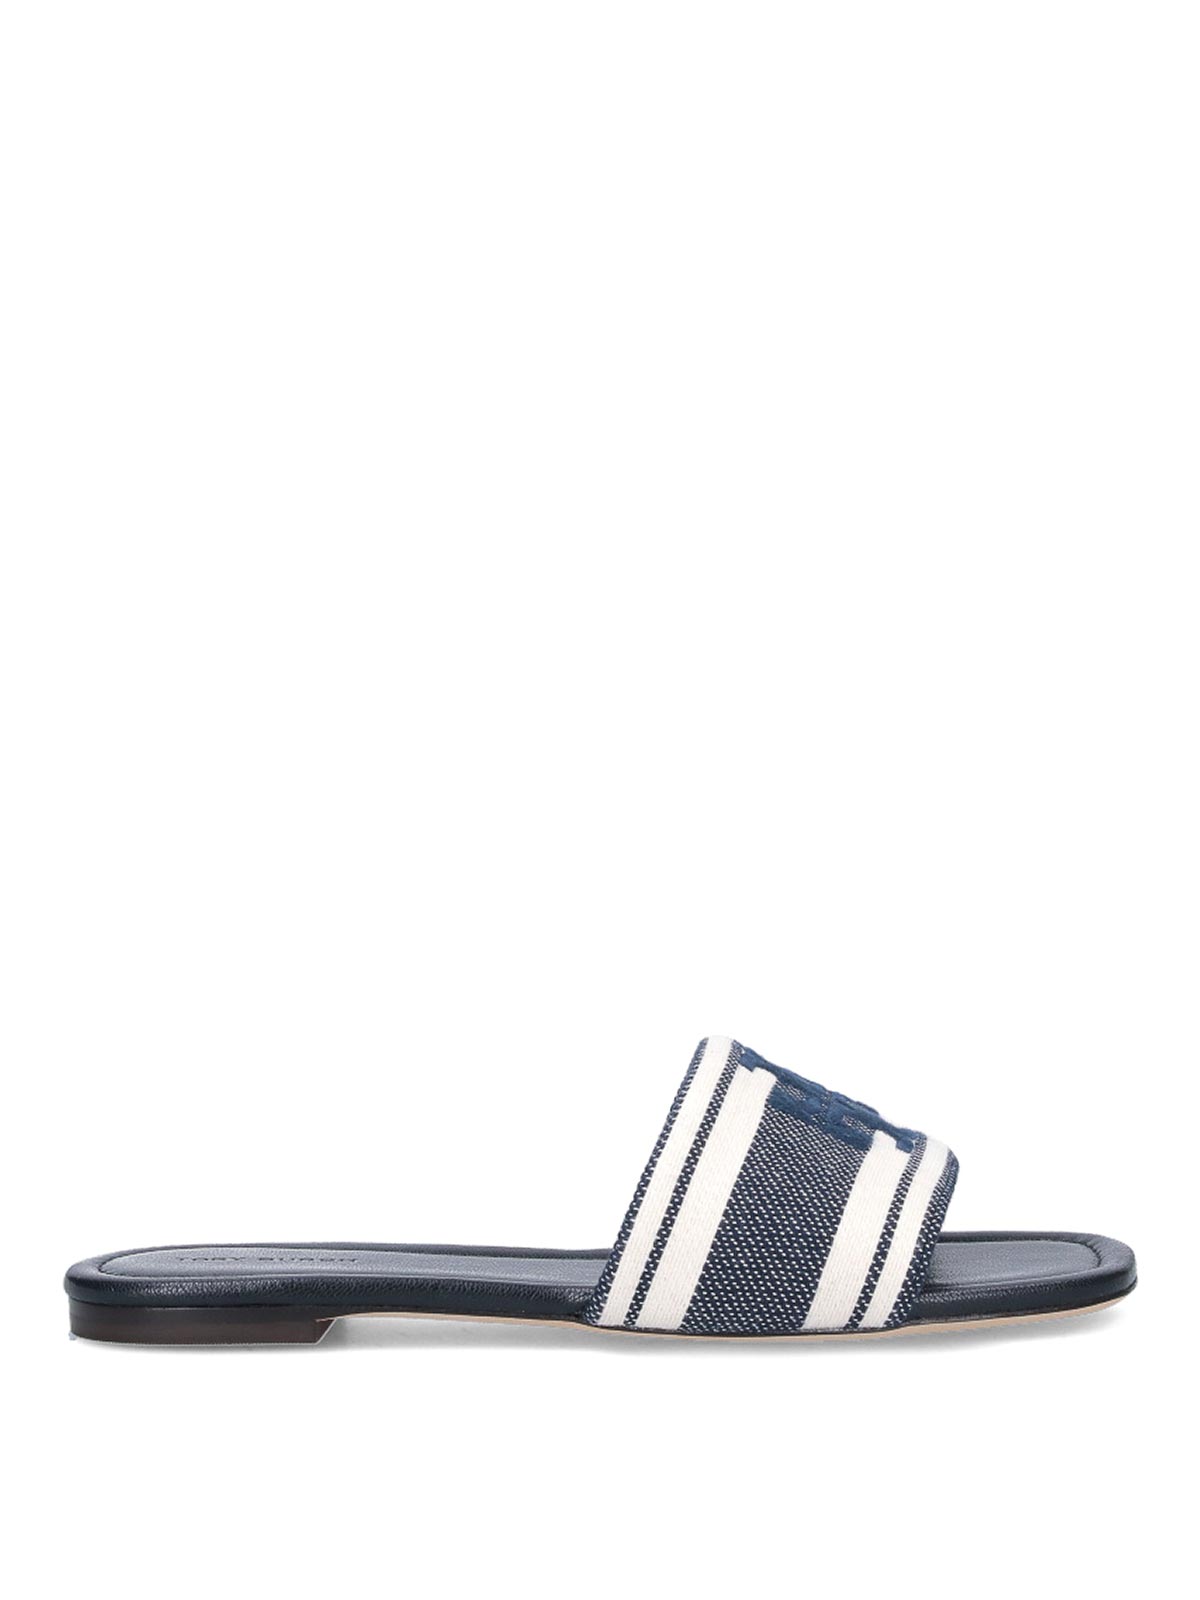 TORY BURCH DOUBLE T JACQUARD SLIDE IN BLUE